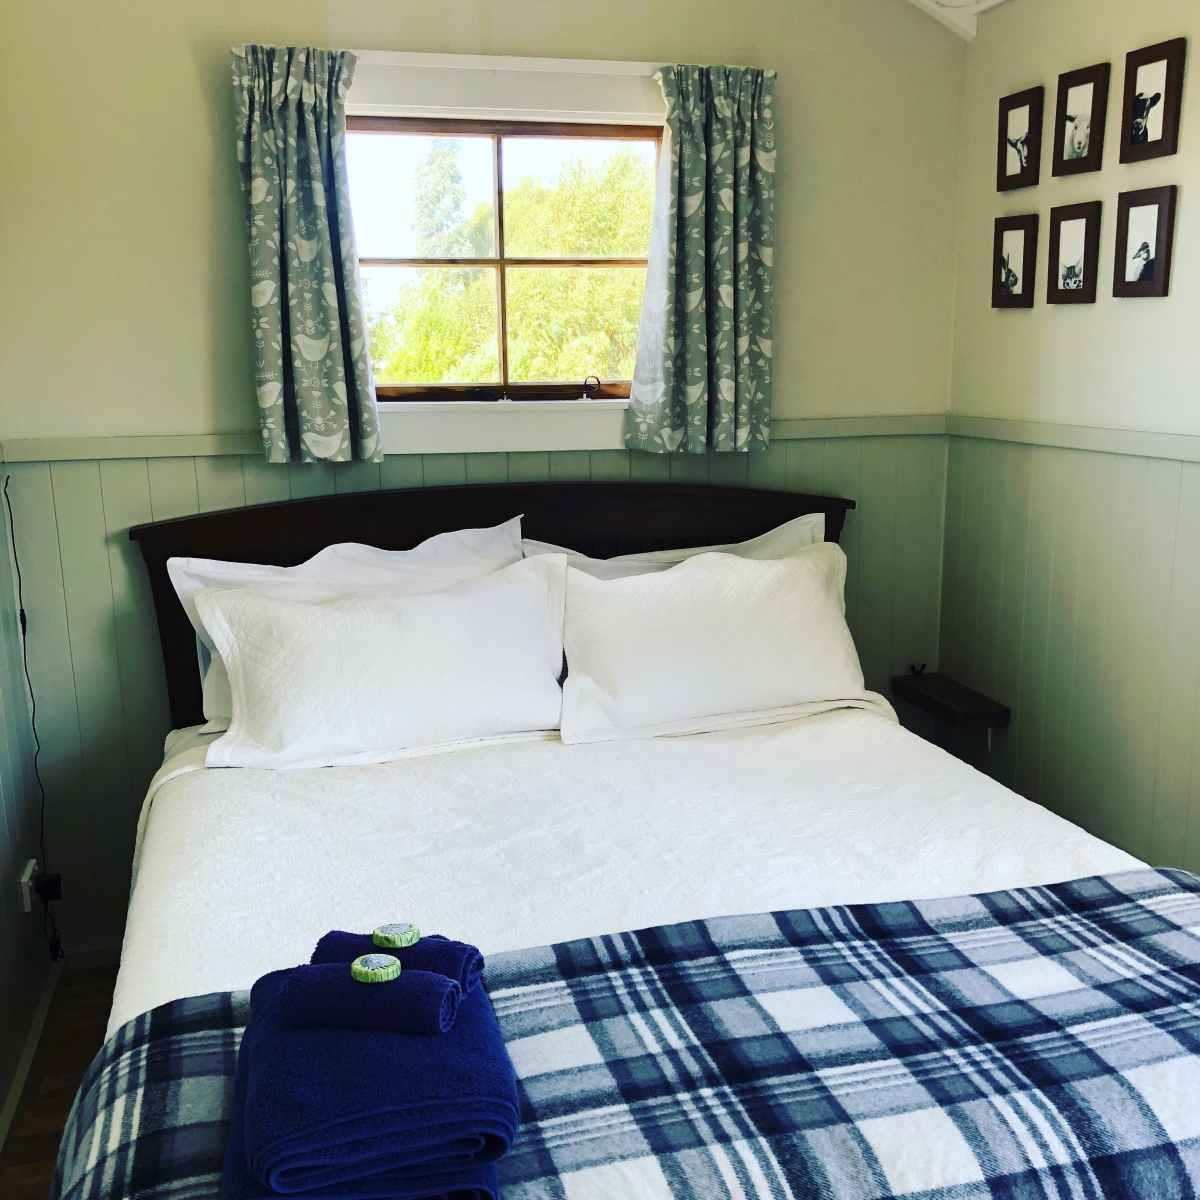 Photo of property: Queen bed